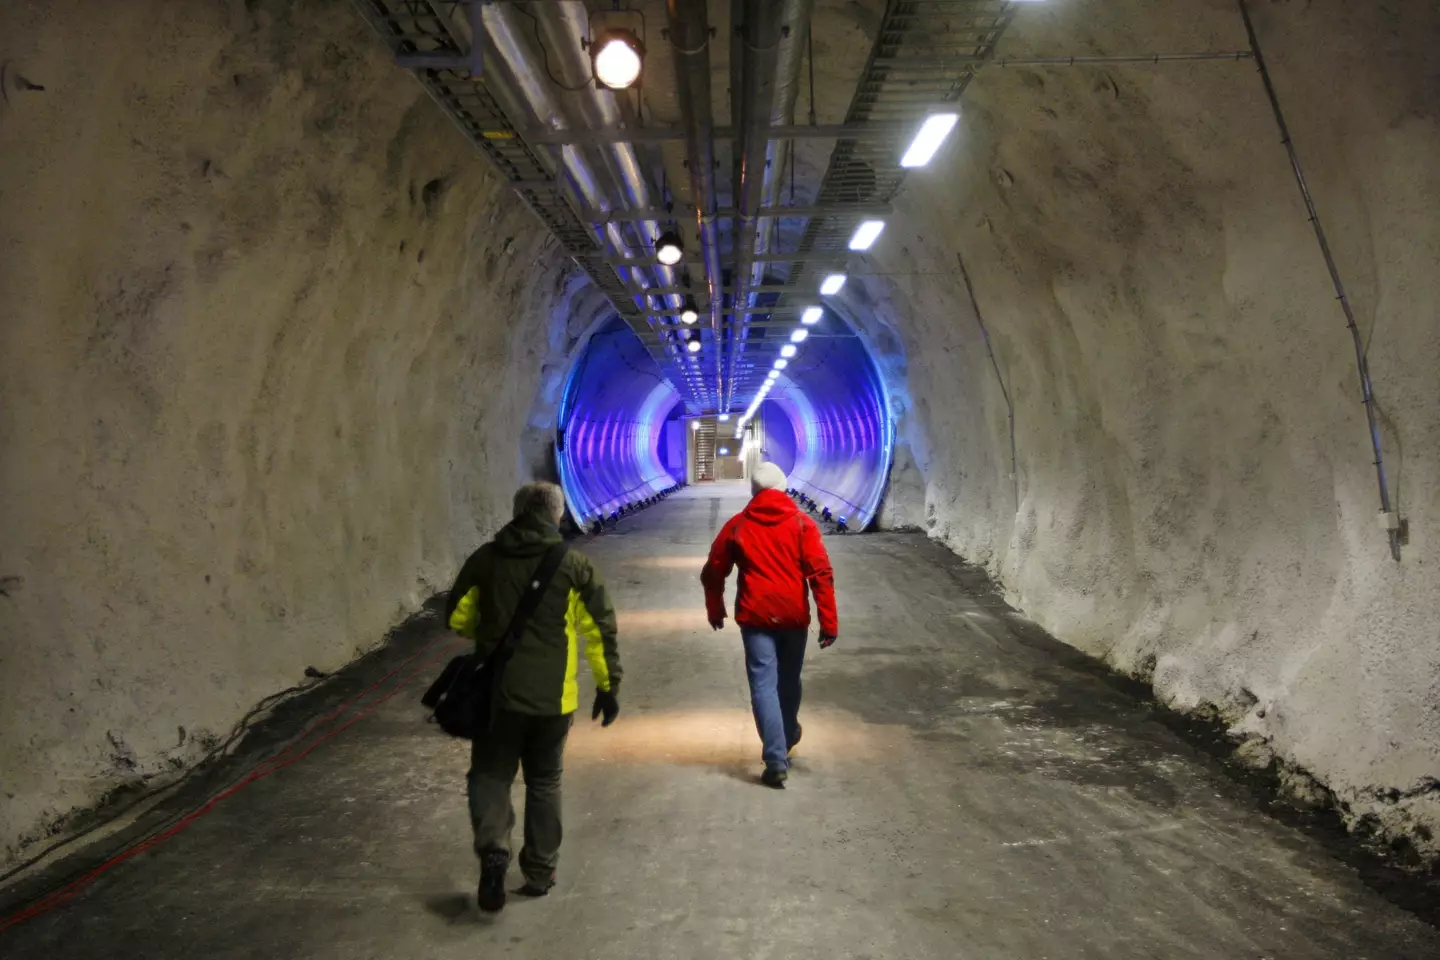 Norway's Global Seed Vault could be key in a crisis.